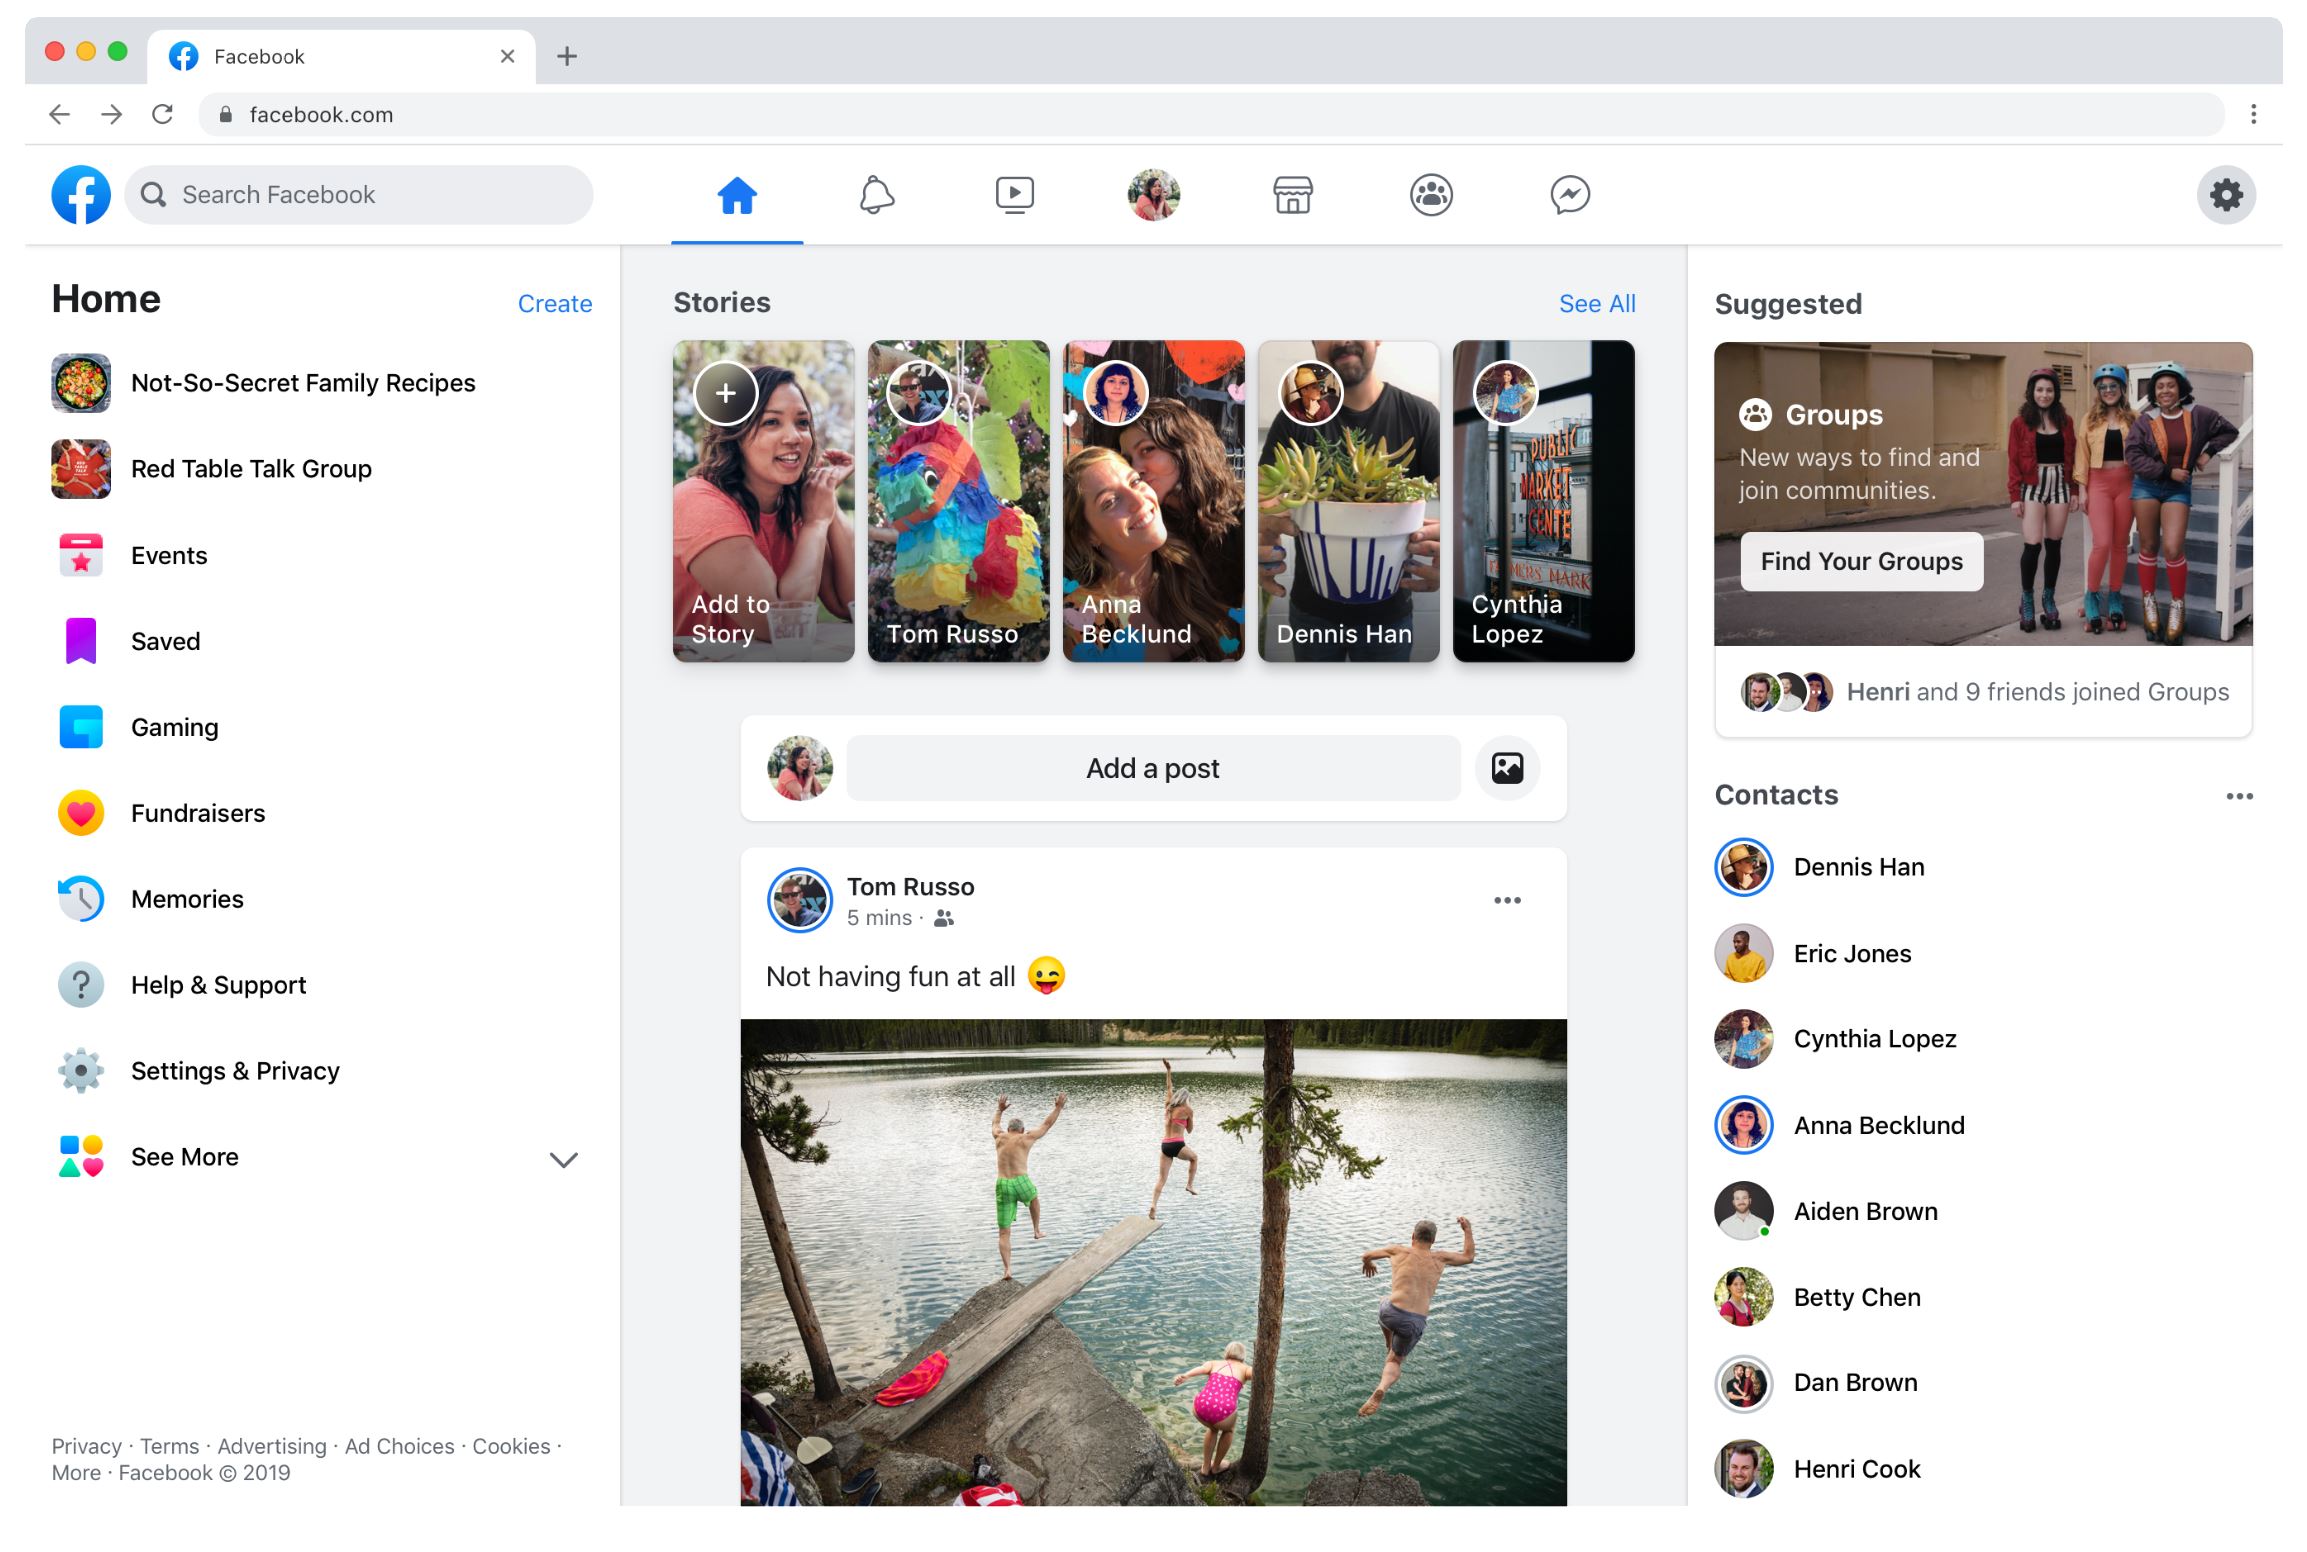 The redesigned Facebook.com is now available for everyone worldwide